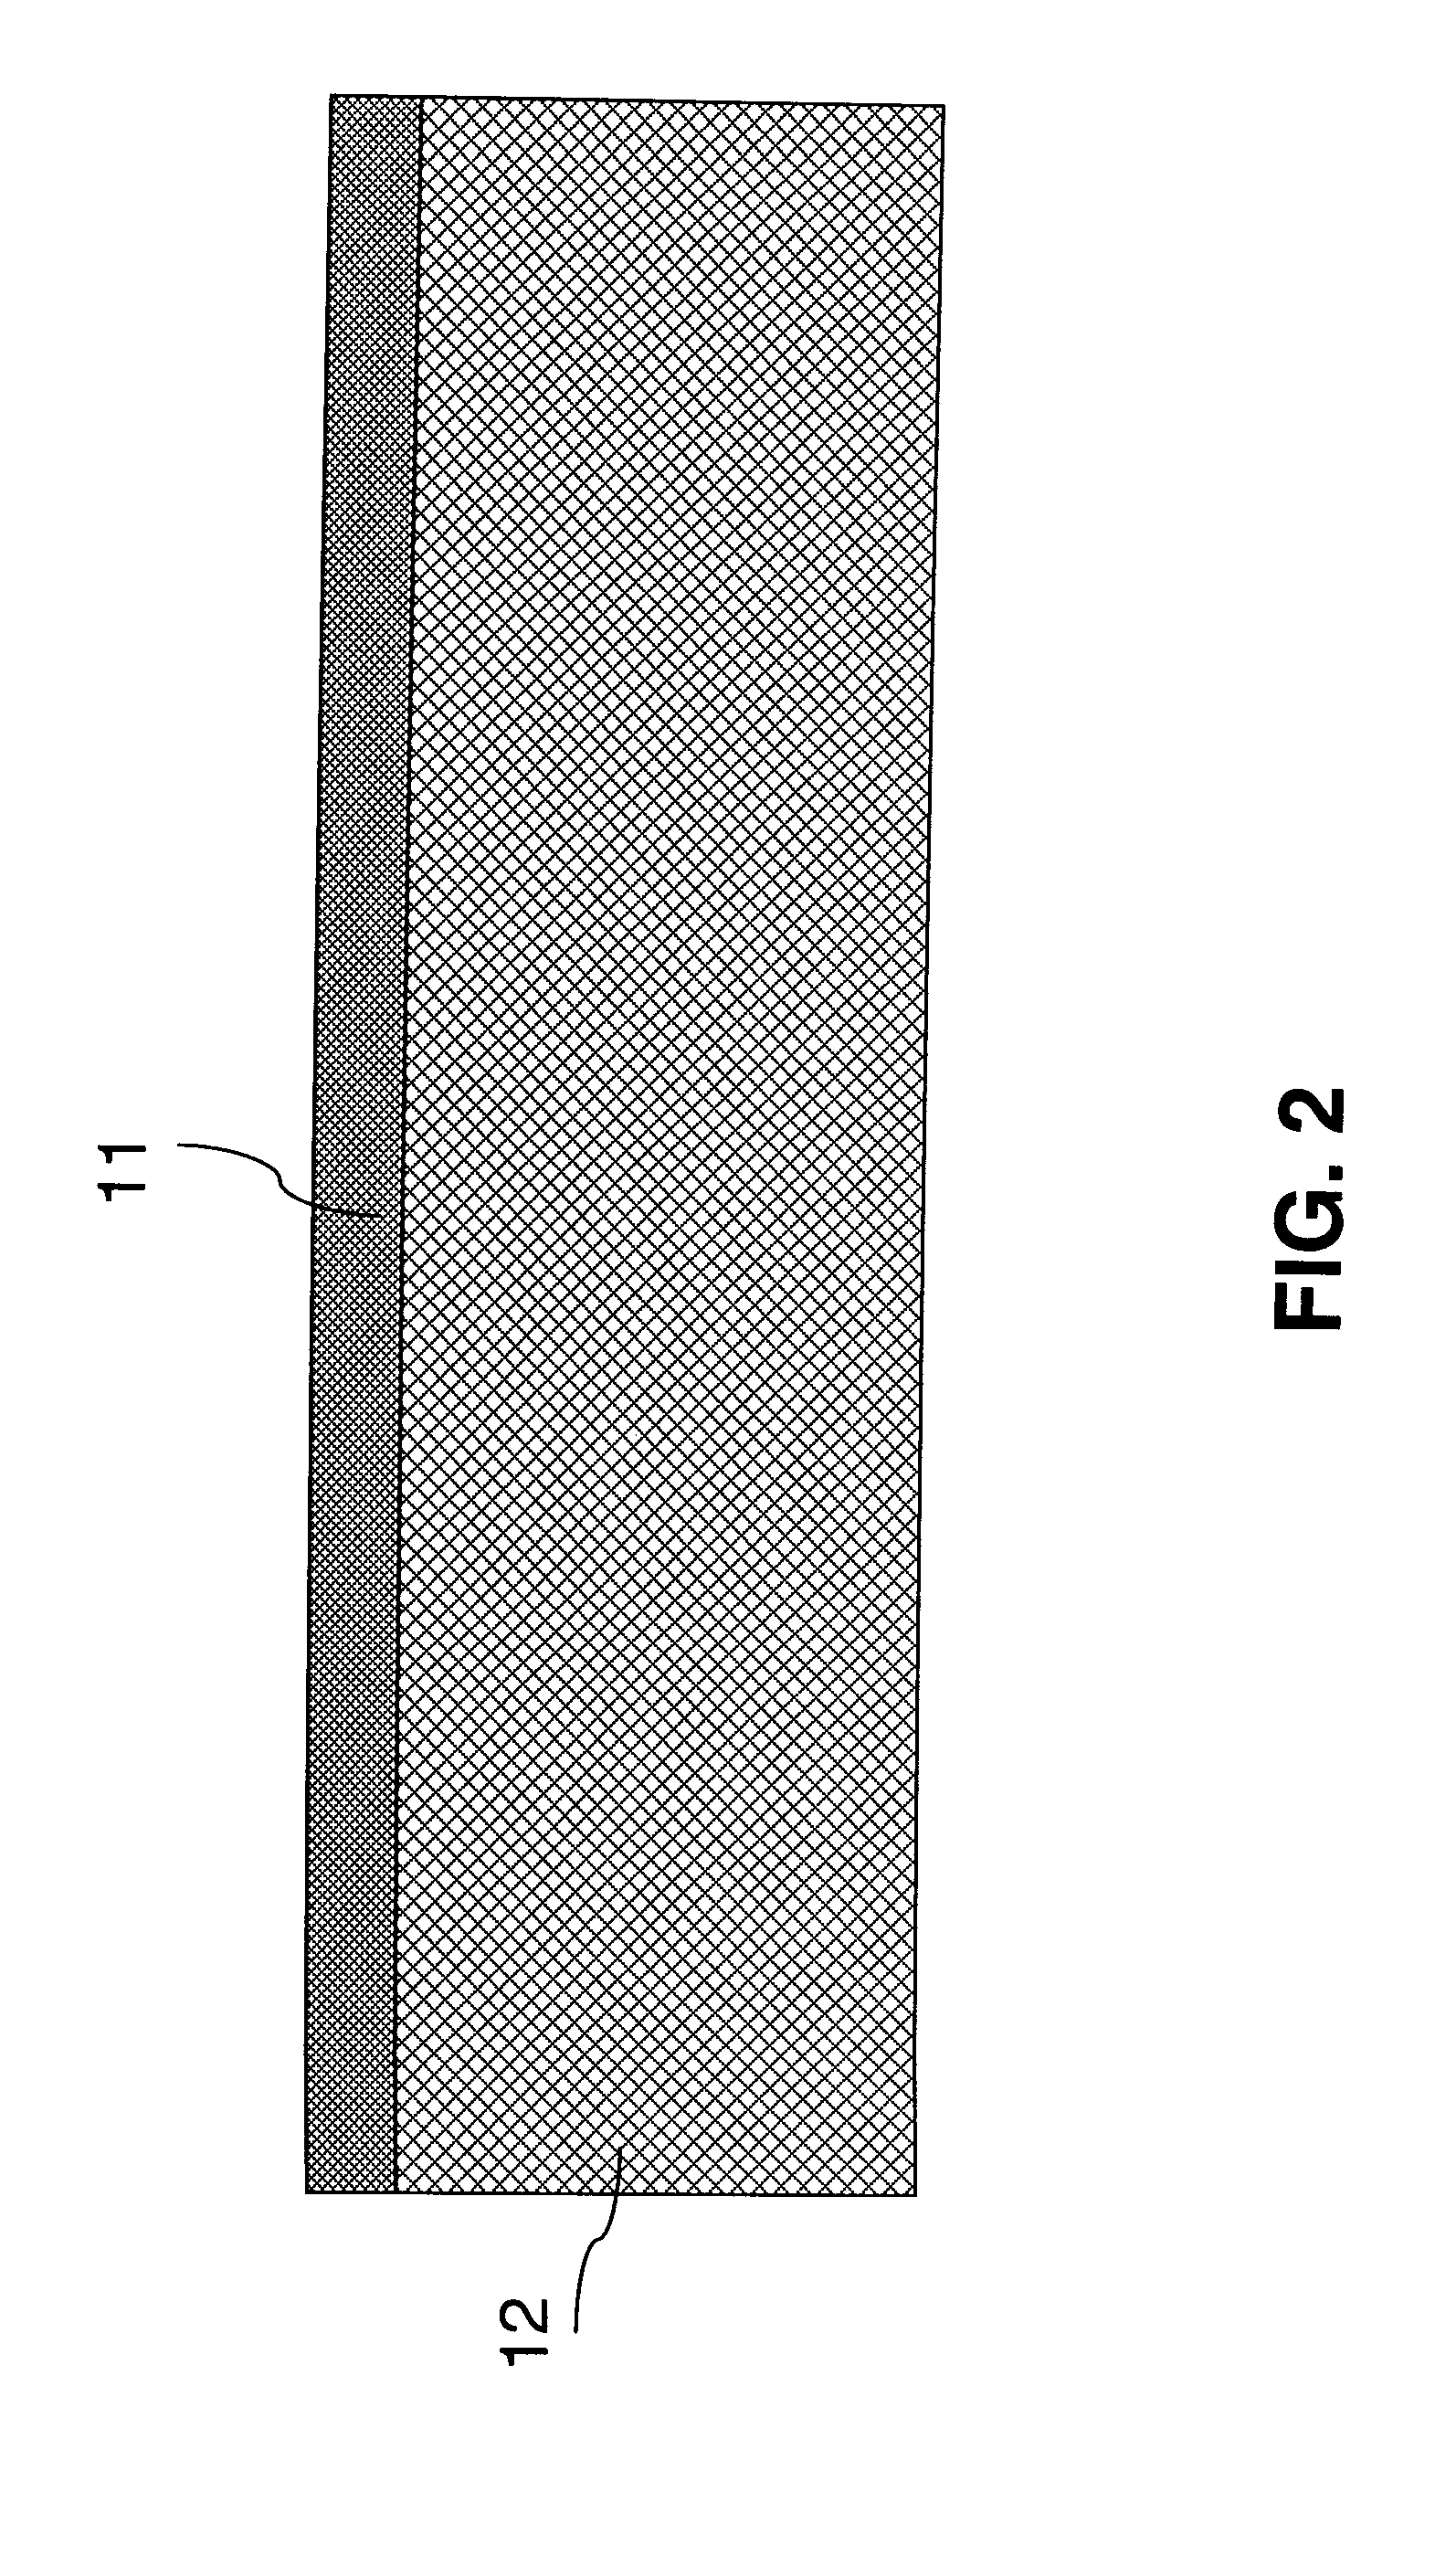 Reduced leakage interconnect structure